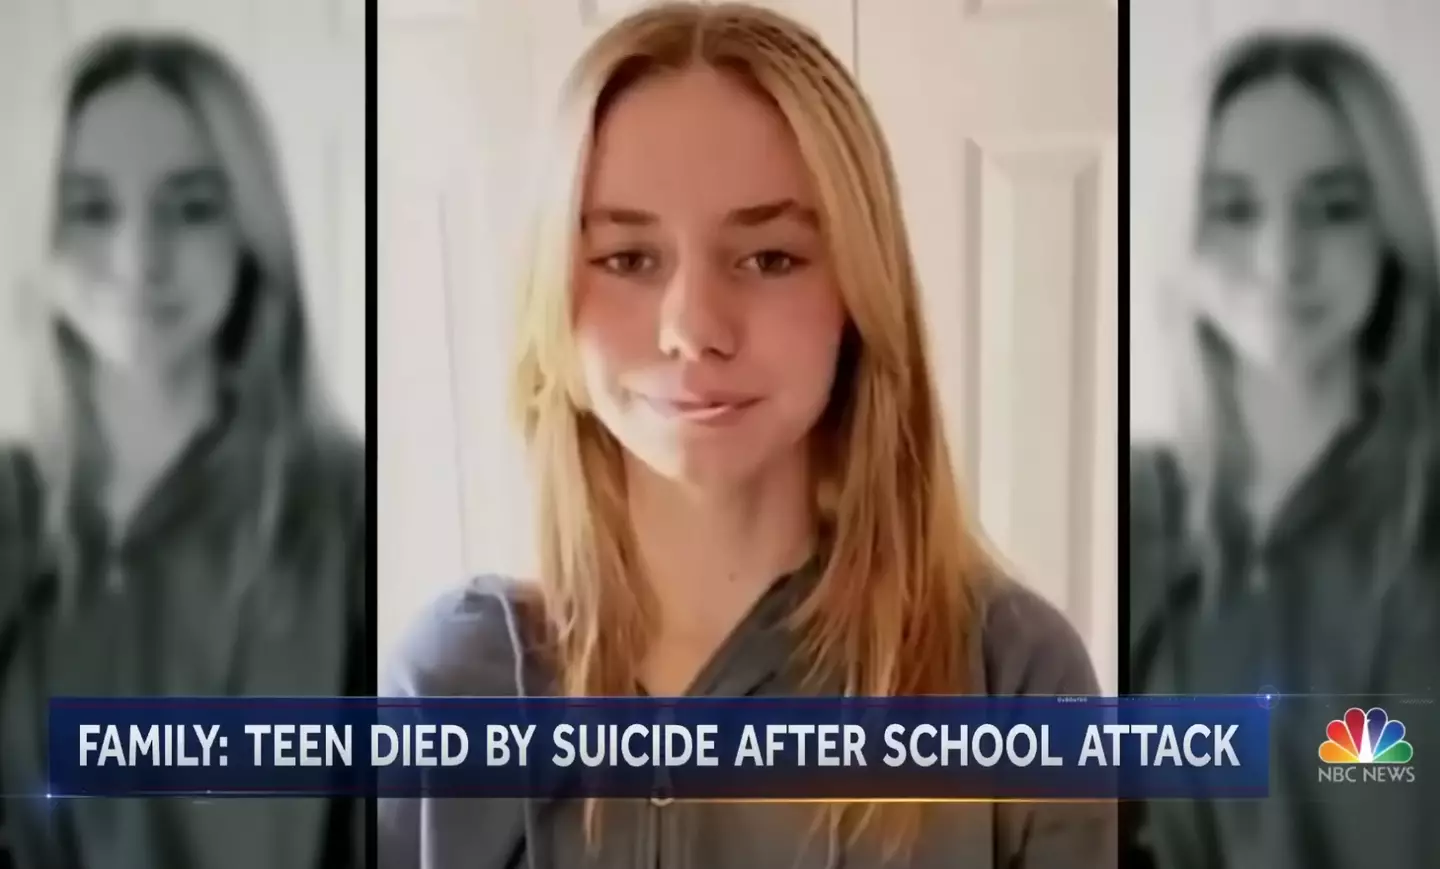 Adriana Kuch took her own life last year.